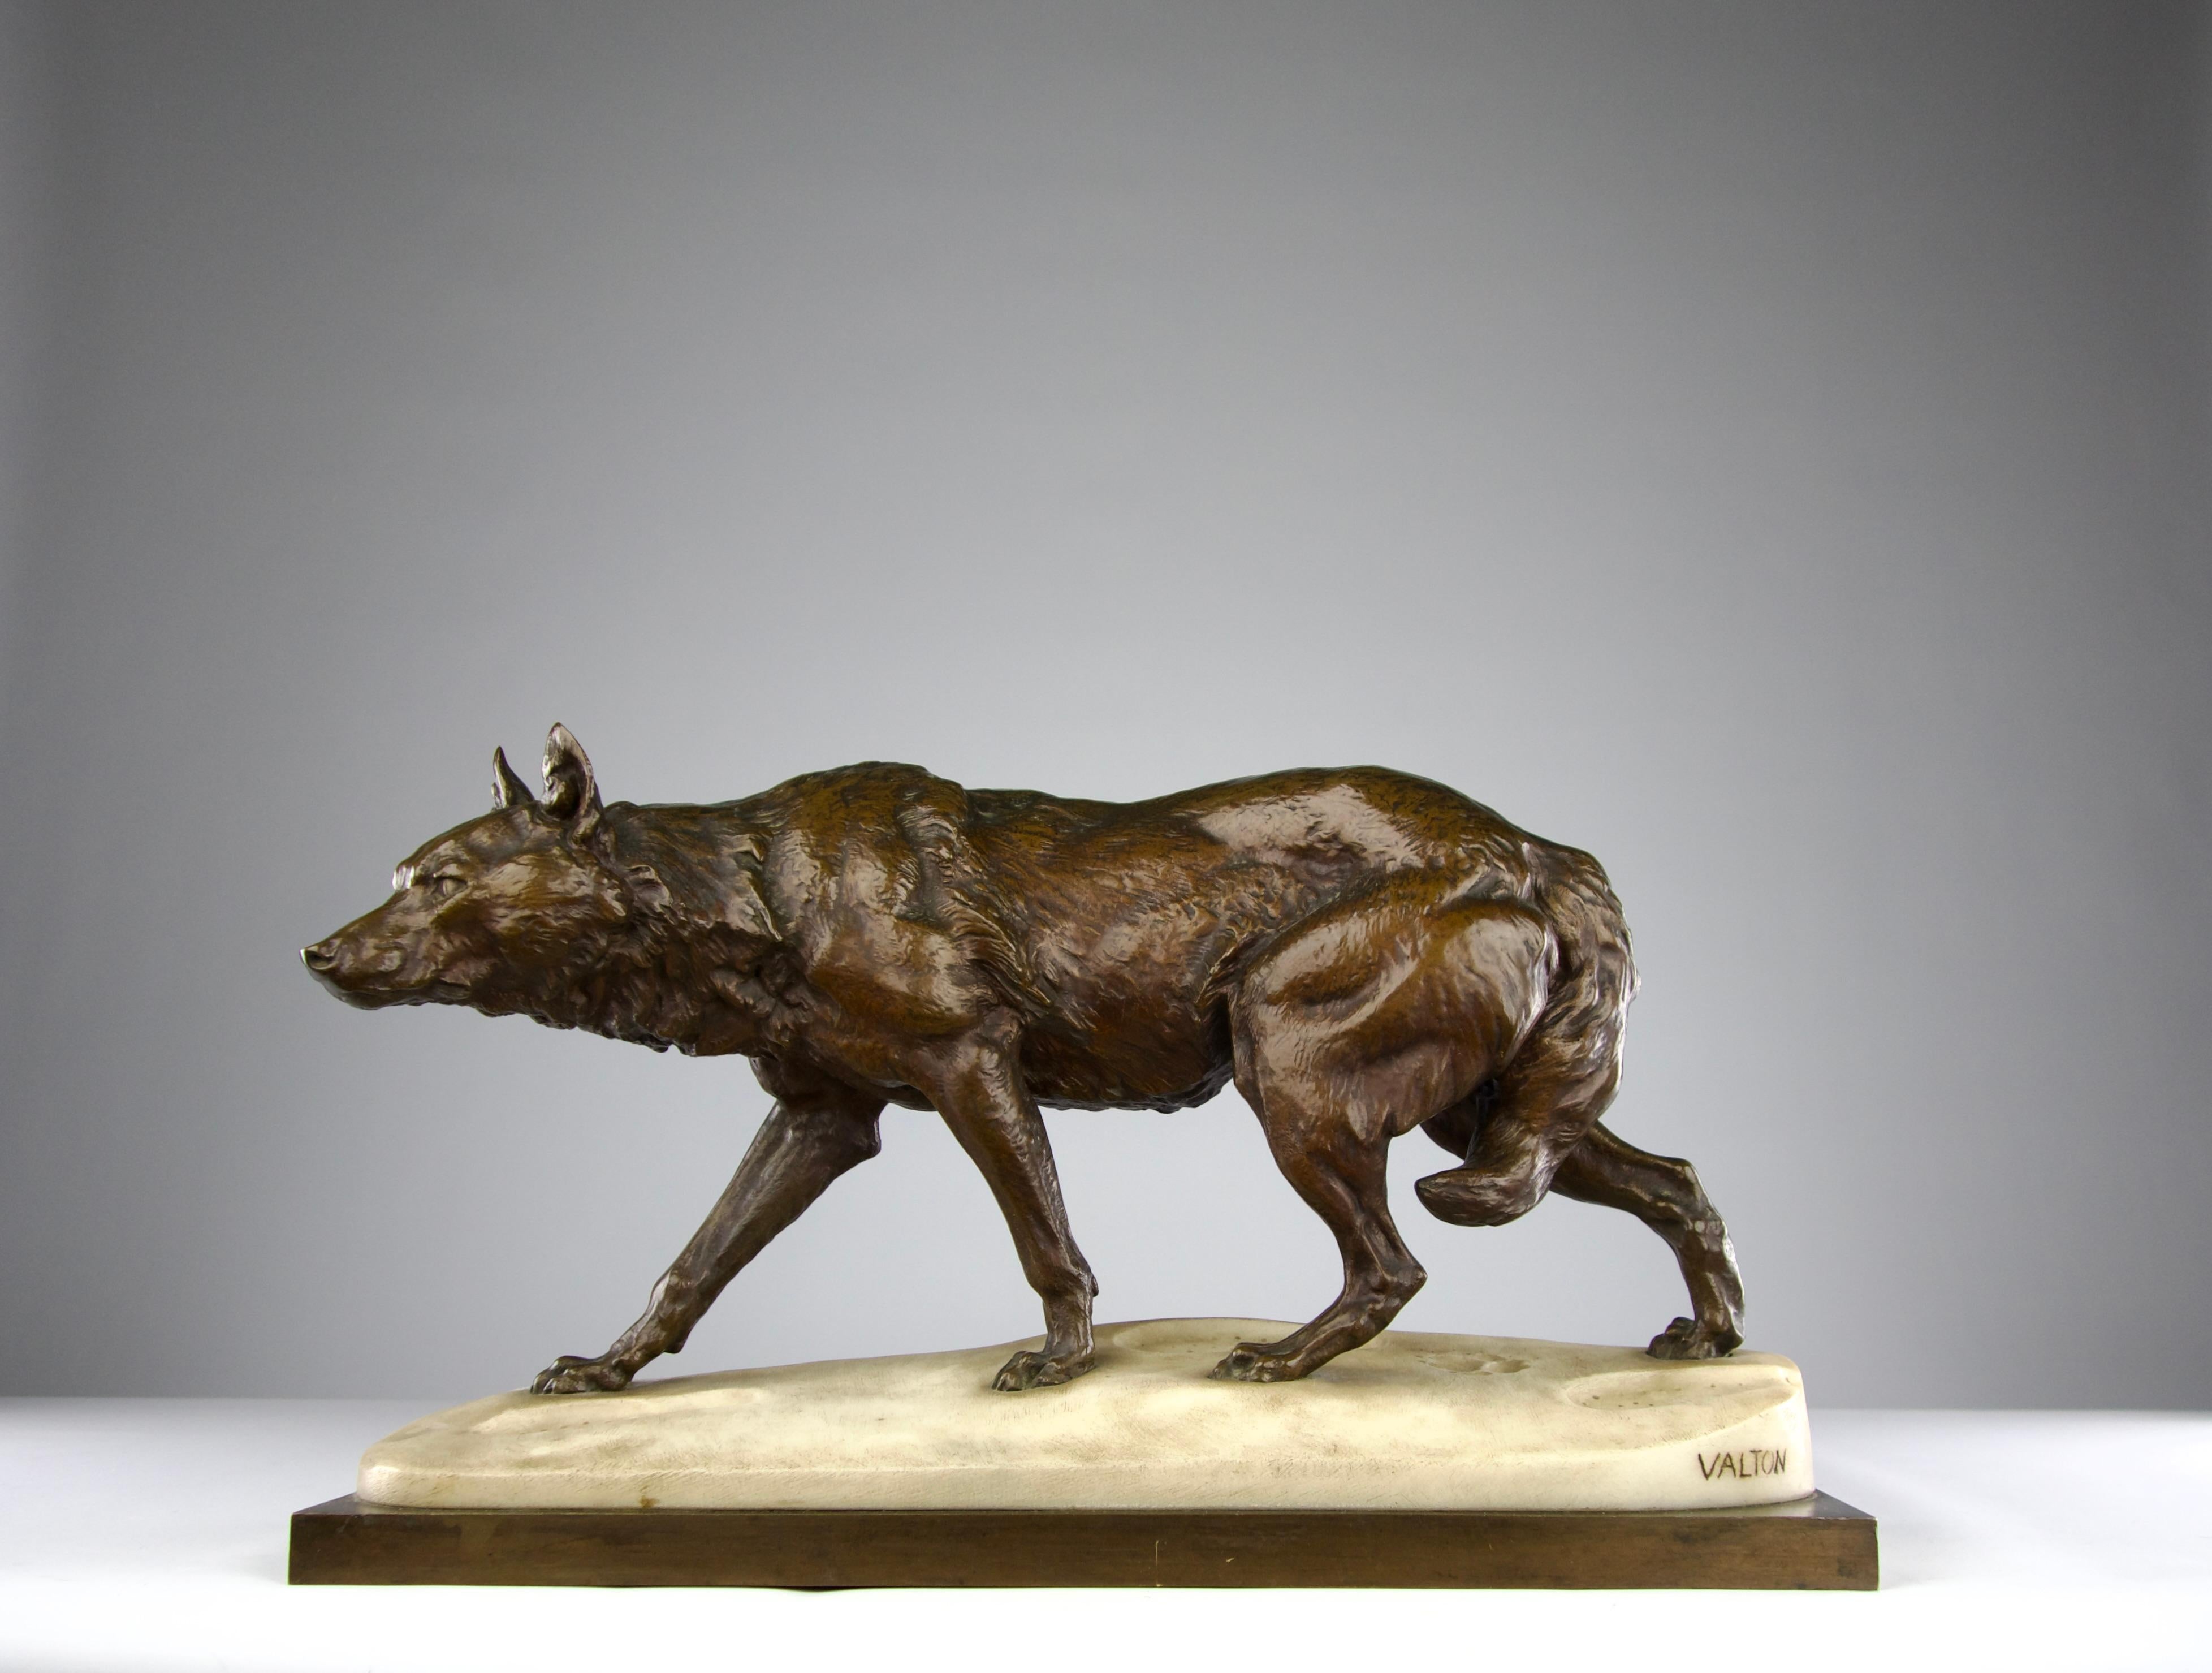 Charles Valton, The Tracking Wolf, Romantic Period Sculpture 19th Century France For Sale 4